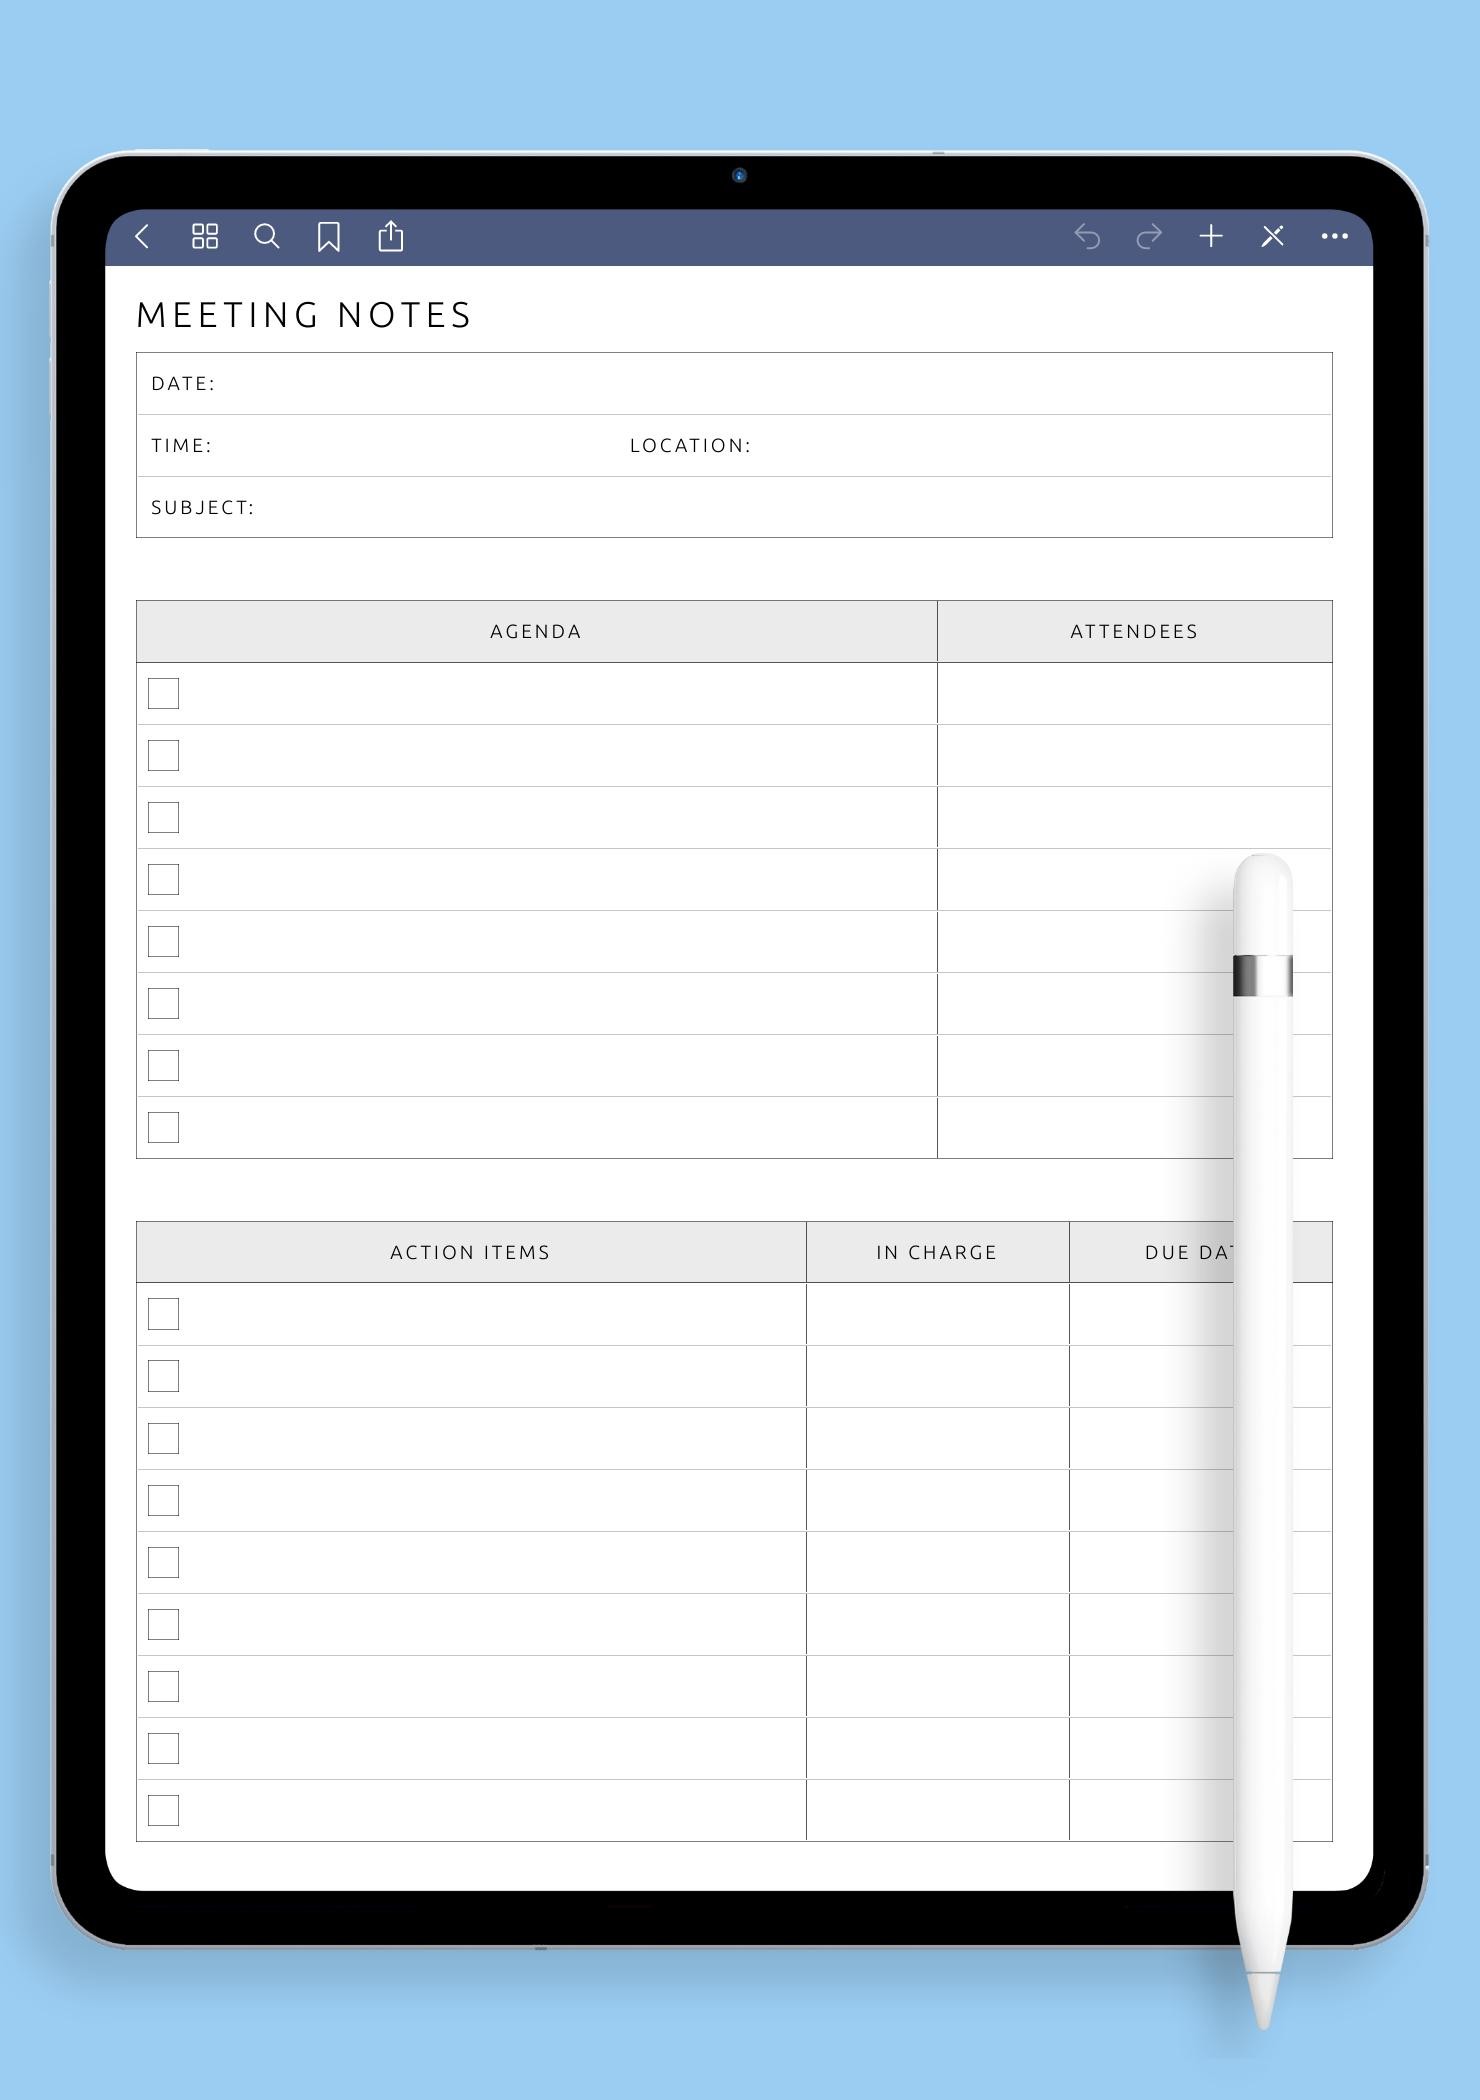 Download Printable Meeting Notes Template PDF